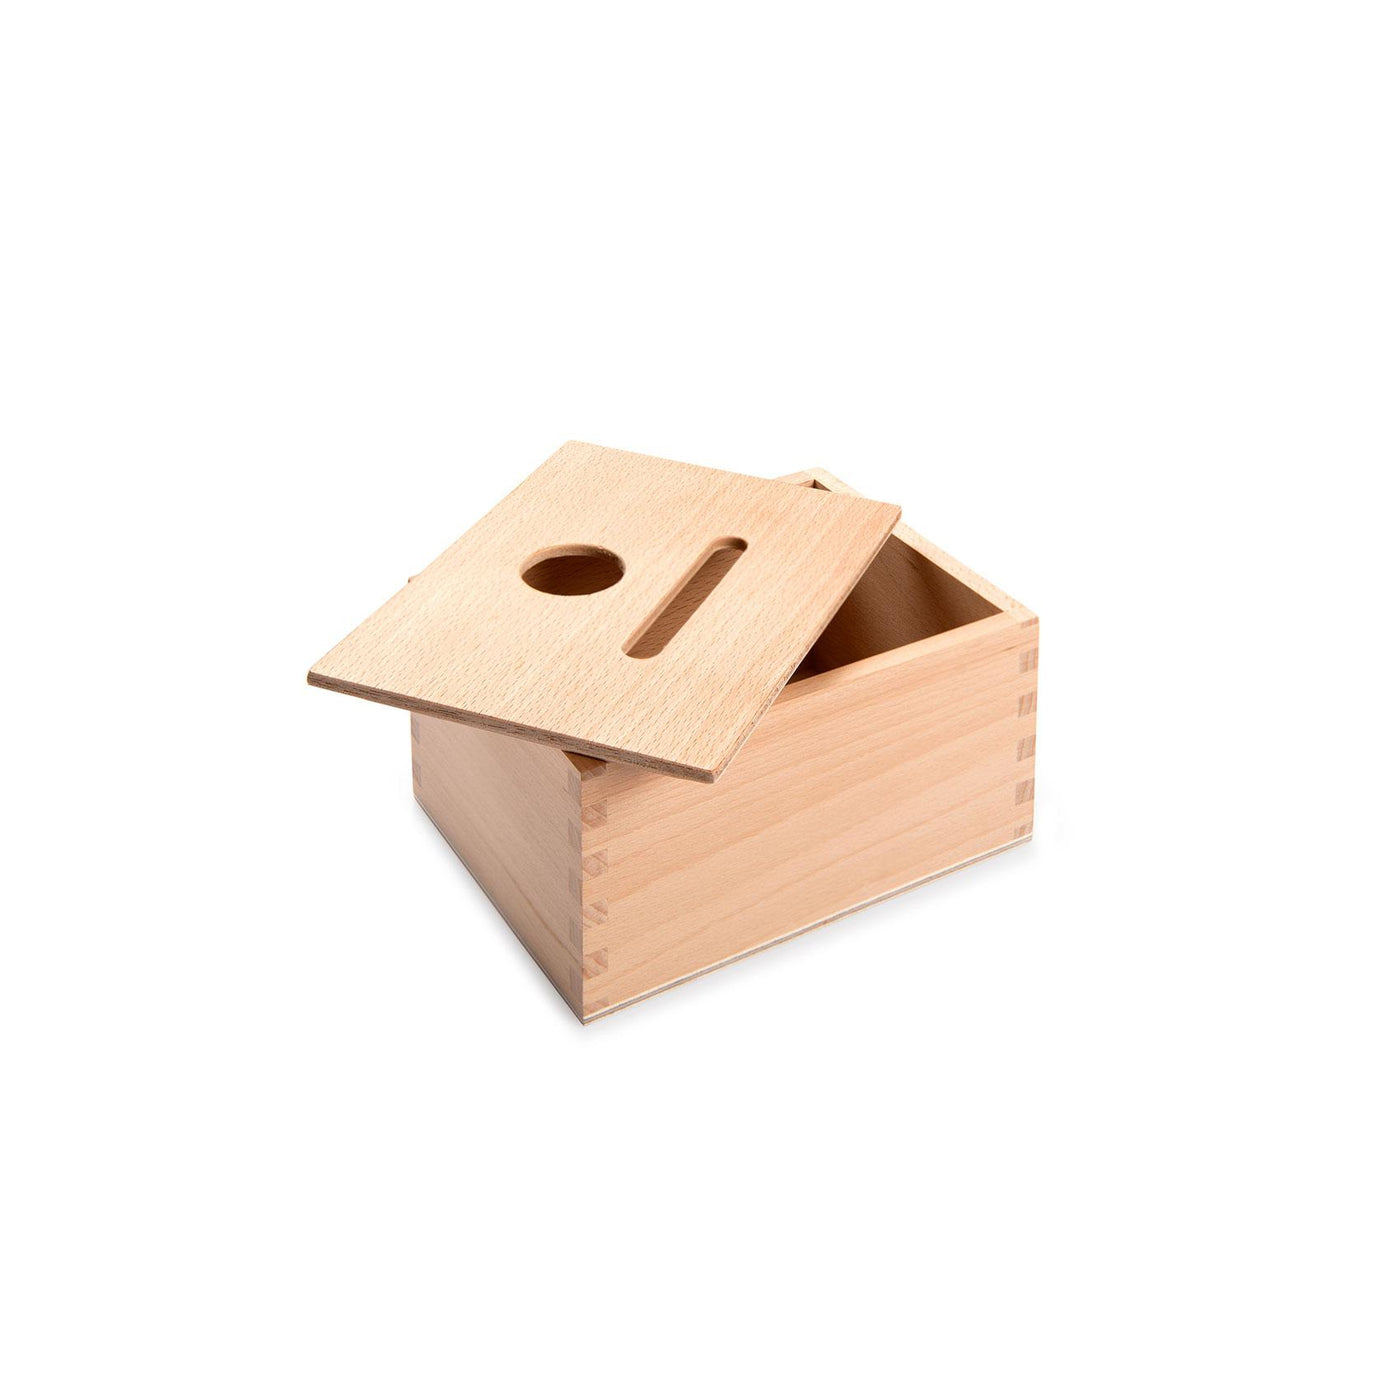 Permanence Wooden Toy Box